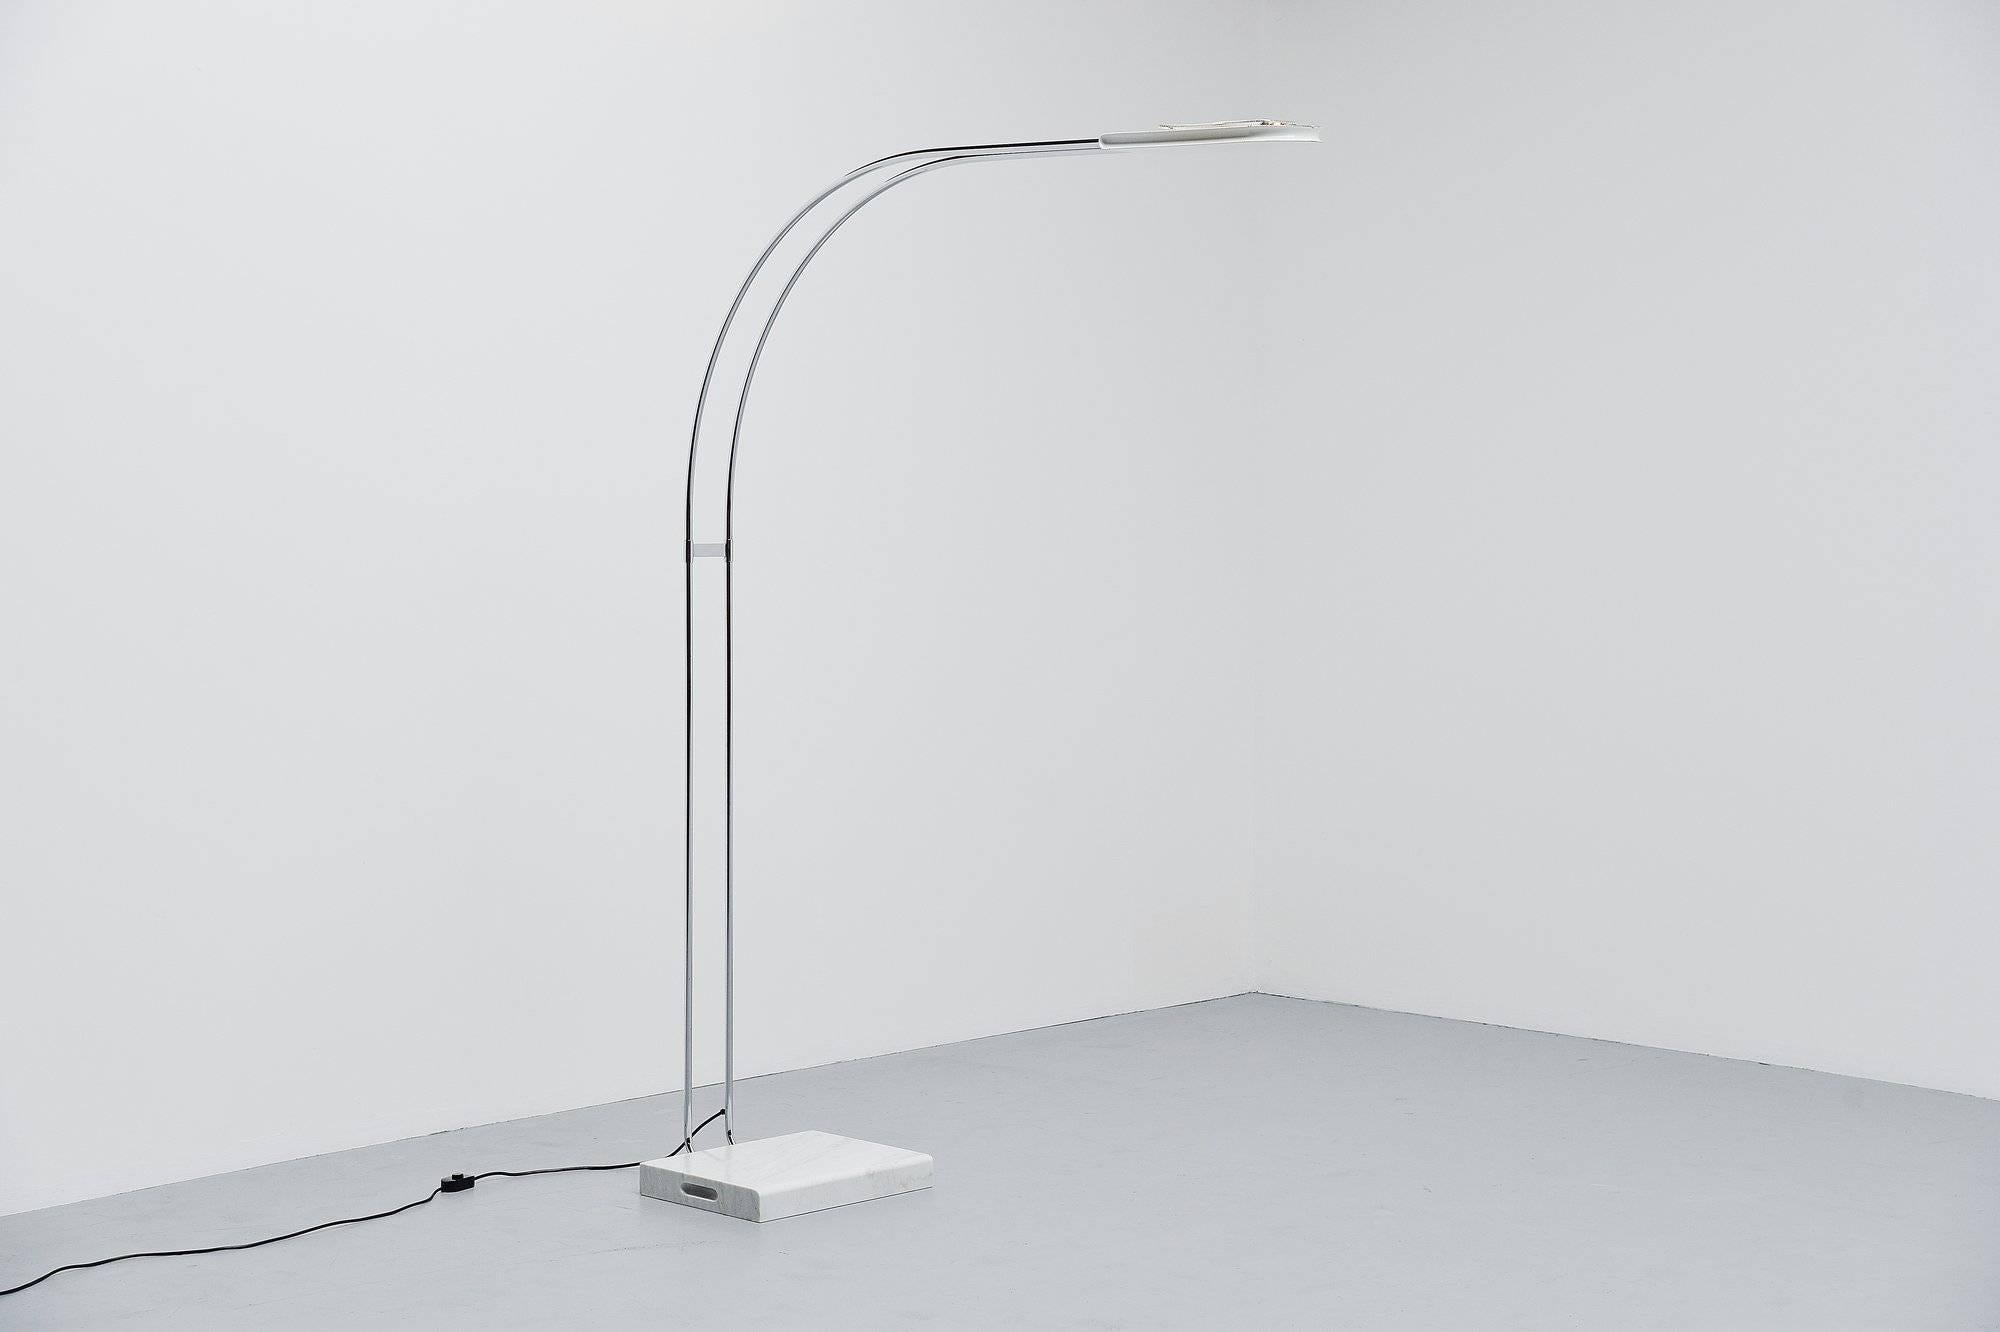 Monumental Gesto Terra floor lamp designed by Bruno Geccheling for Gruppo Skipper, Italy 1974. This rare large arc shaped floor lamp has a rectangular whit Carrara marble base and a chrome-plated tubular arm. It has a white painted shade with